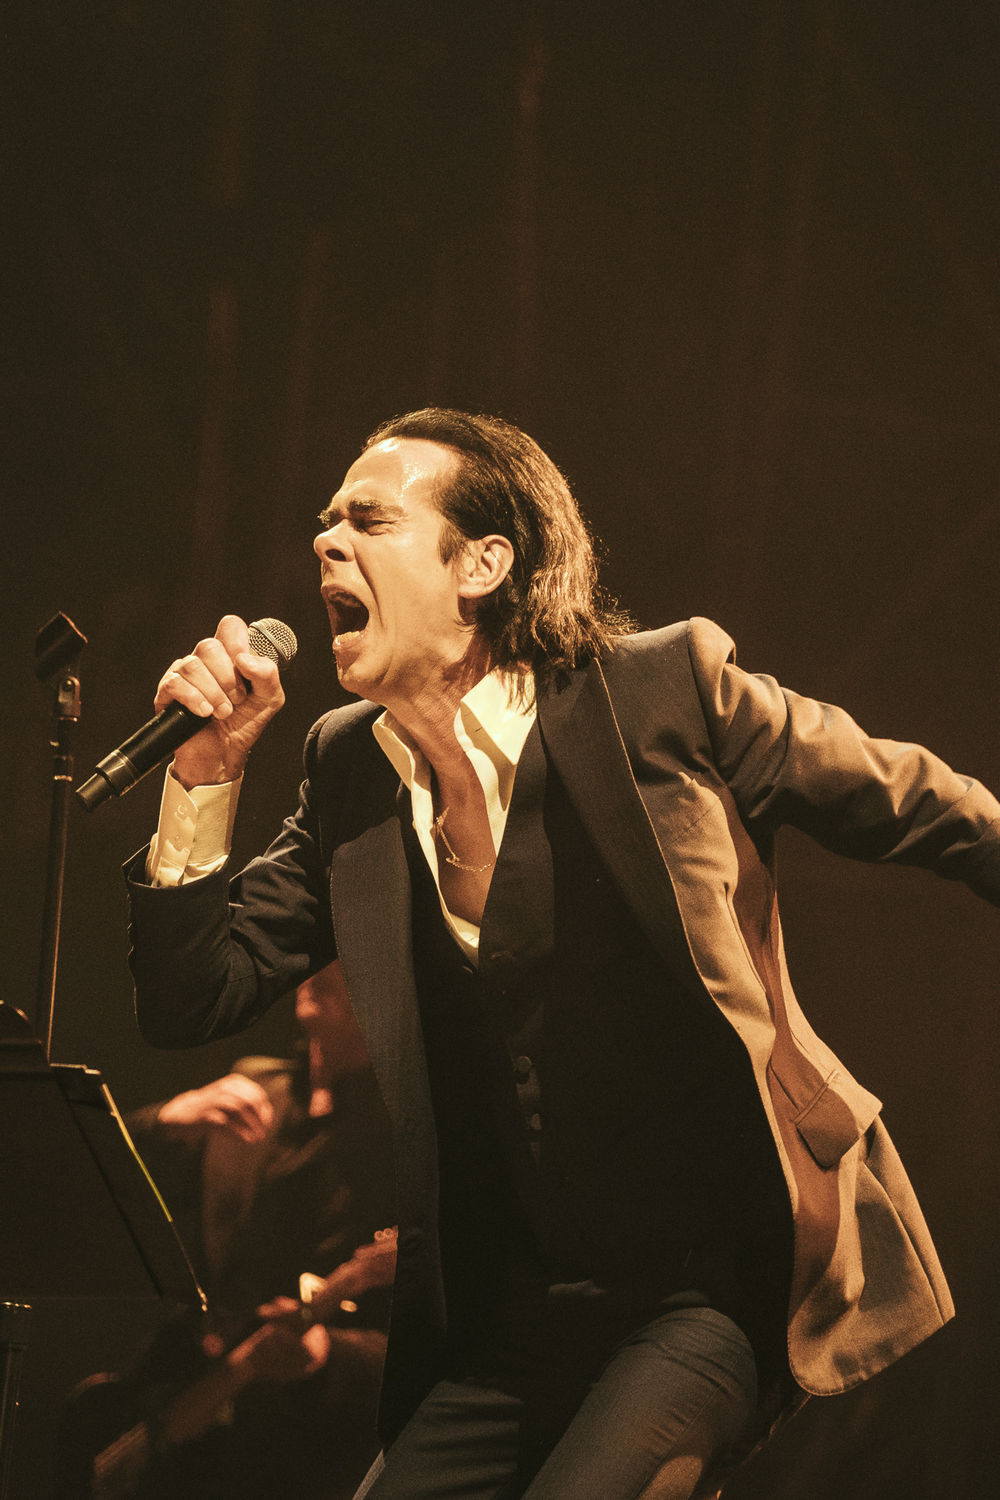 Primavera-Sound-Barcelona-2022-Nick-Cave-And-The-Bad-Seeds-09-Pull-And-Bear-SergioAlbert